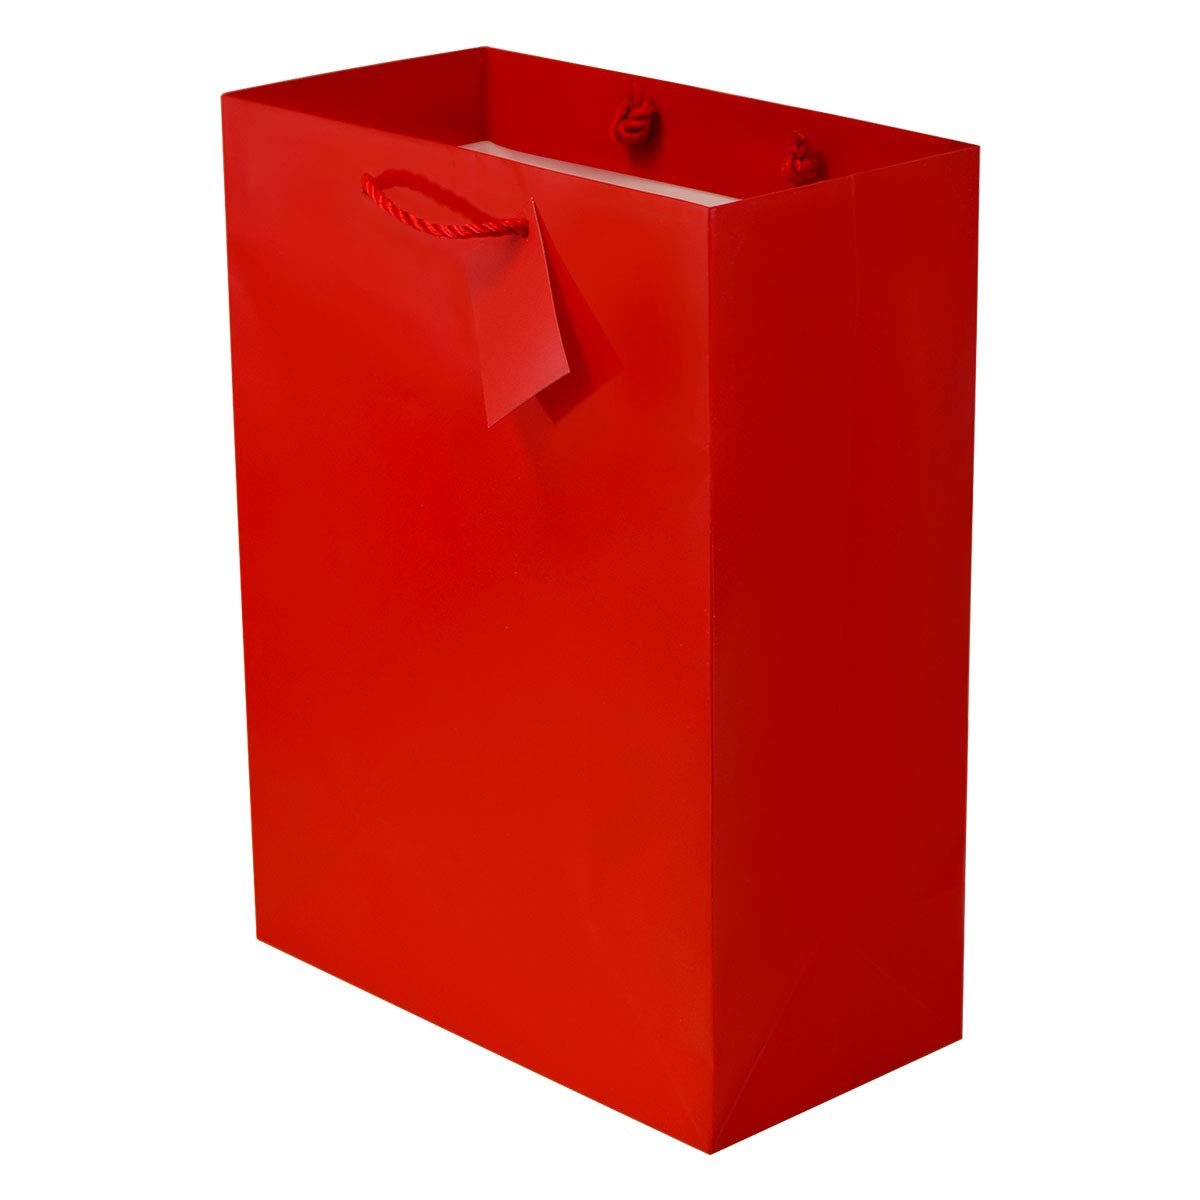 OccasionALL Gift Bags Assorted Sizes - 12 Pack Red Paper Bags with Handles, Solid Gift Wrap Euro Totes for Birthdays, Party Favors, Baby Shower, Easter, Bachelorette Parties, Weddings, Holidays, Bulk